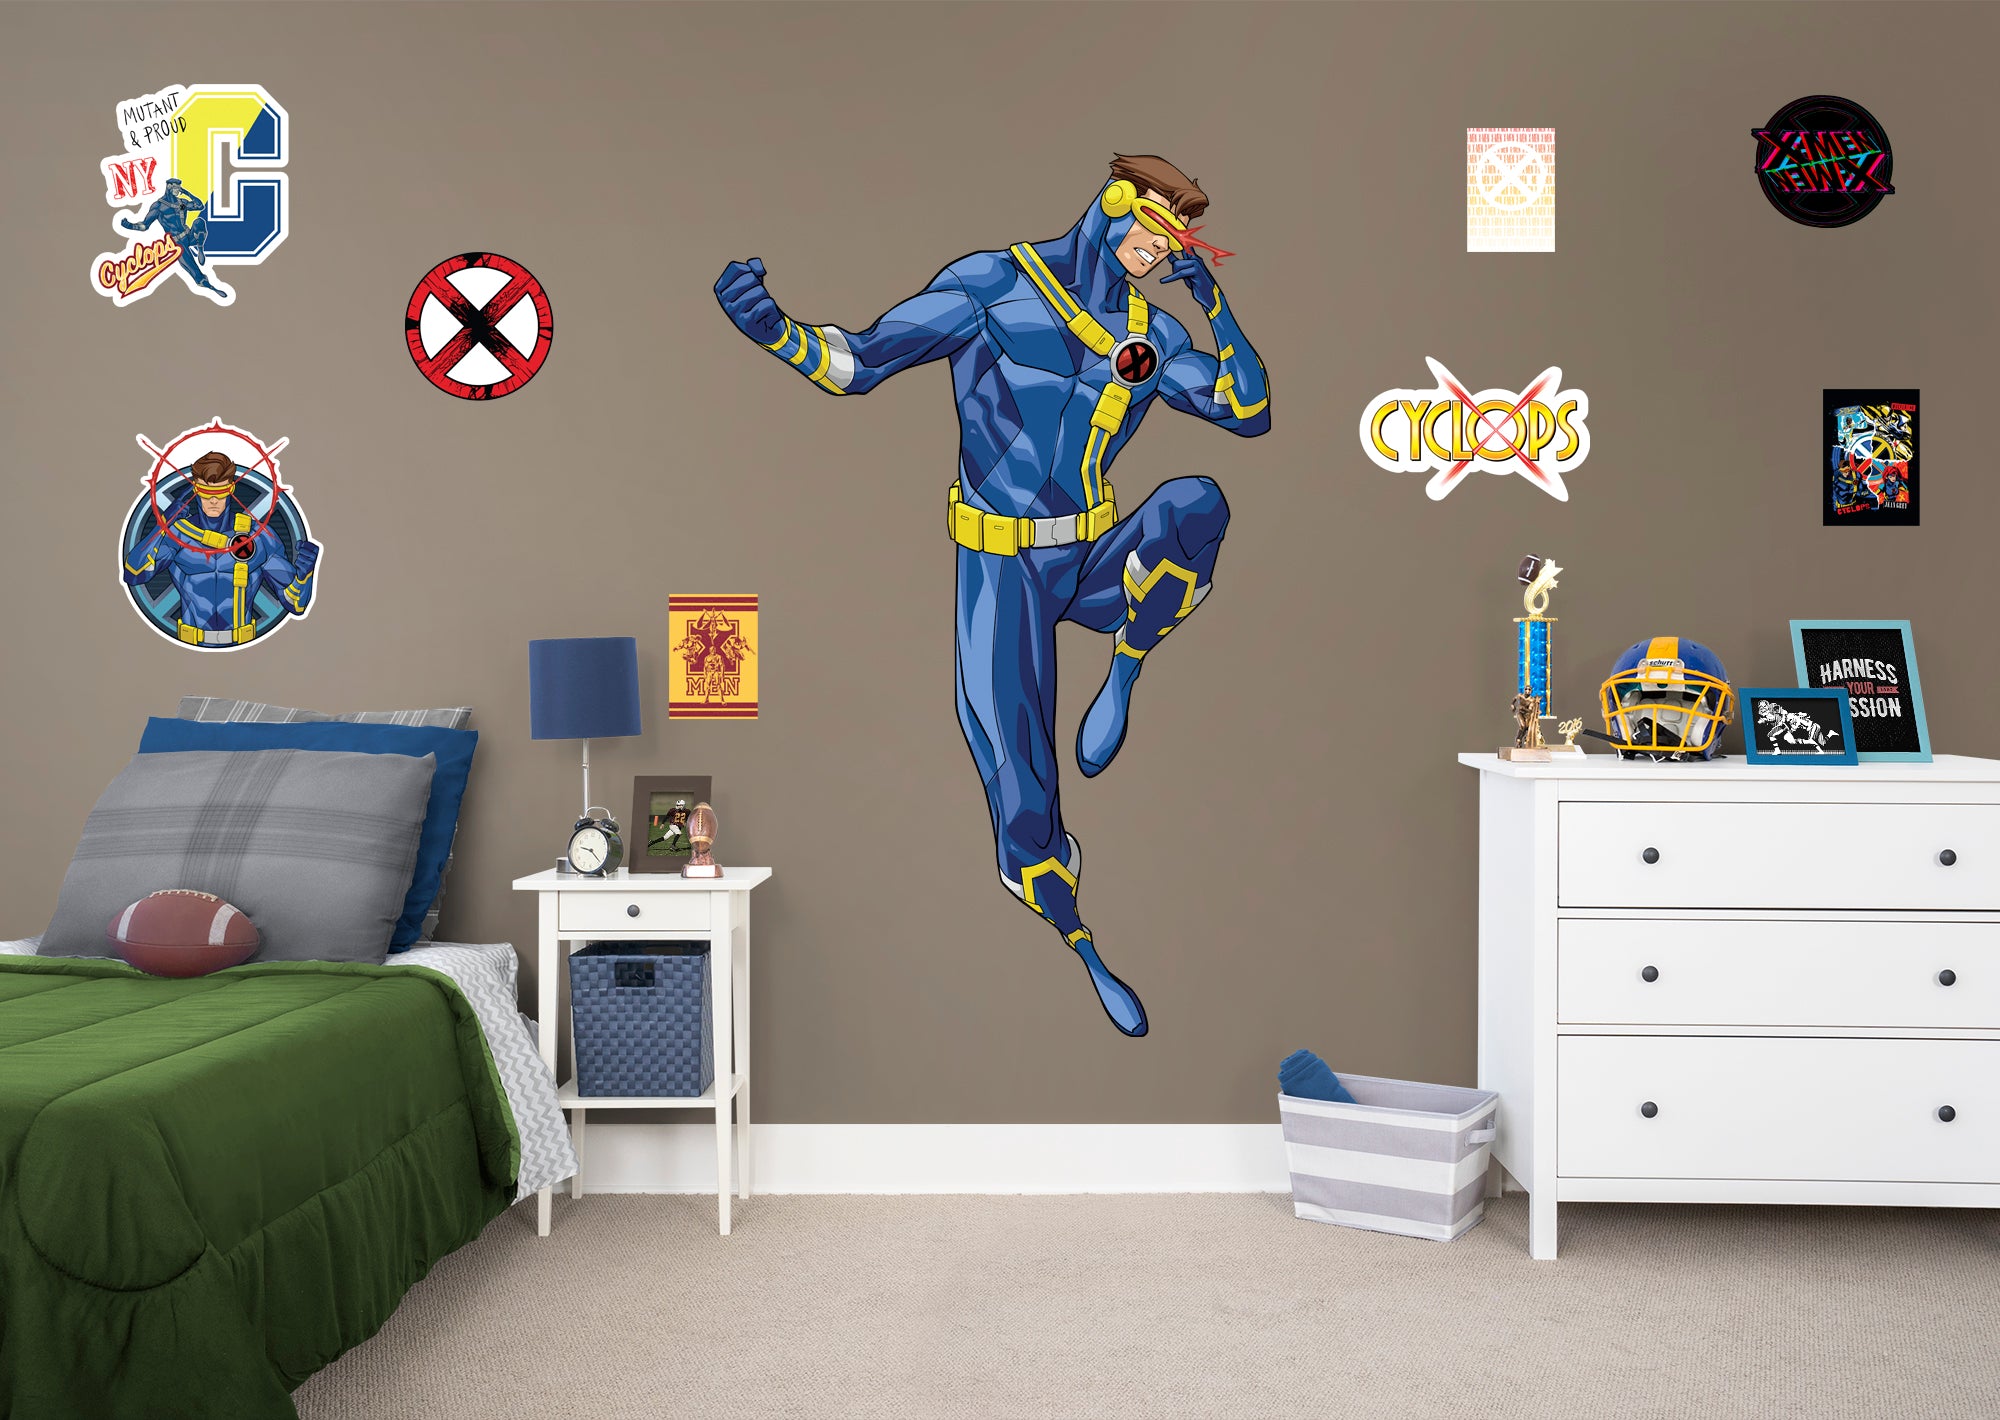 X-Men Cyclops RealBig - Officially Licensed Marvel Removable Wall Decal Life-Size Character + 8 Decals (49"W x 77"H) by Fathead